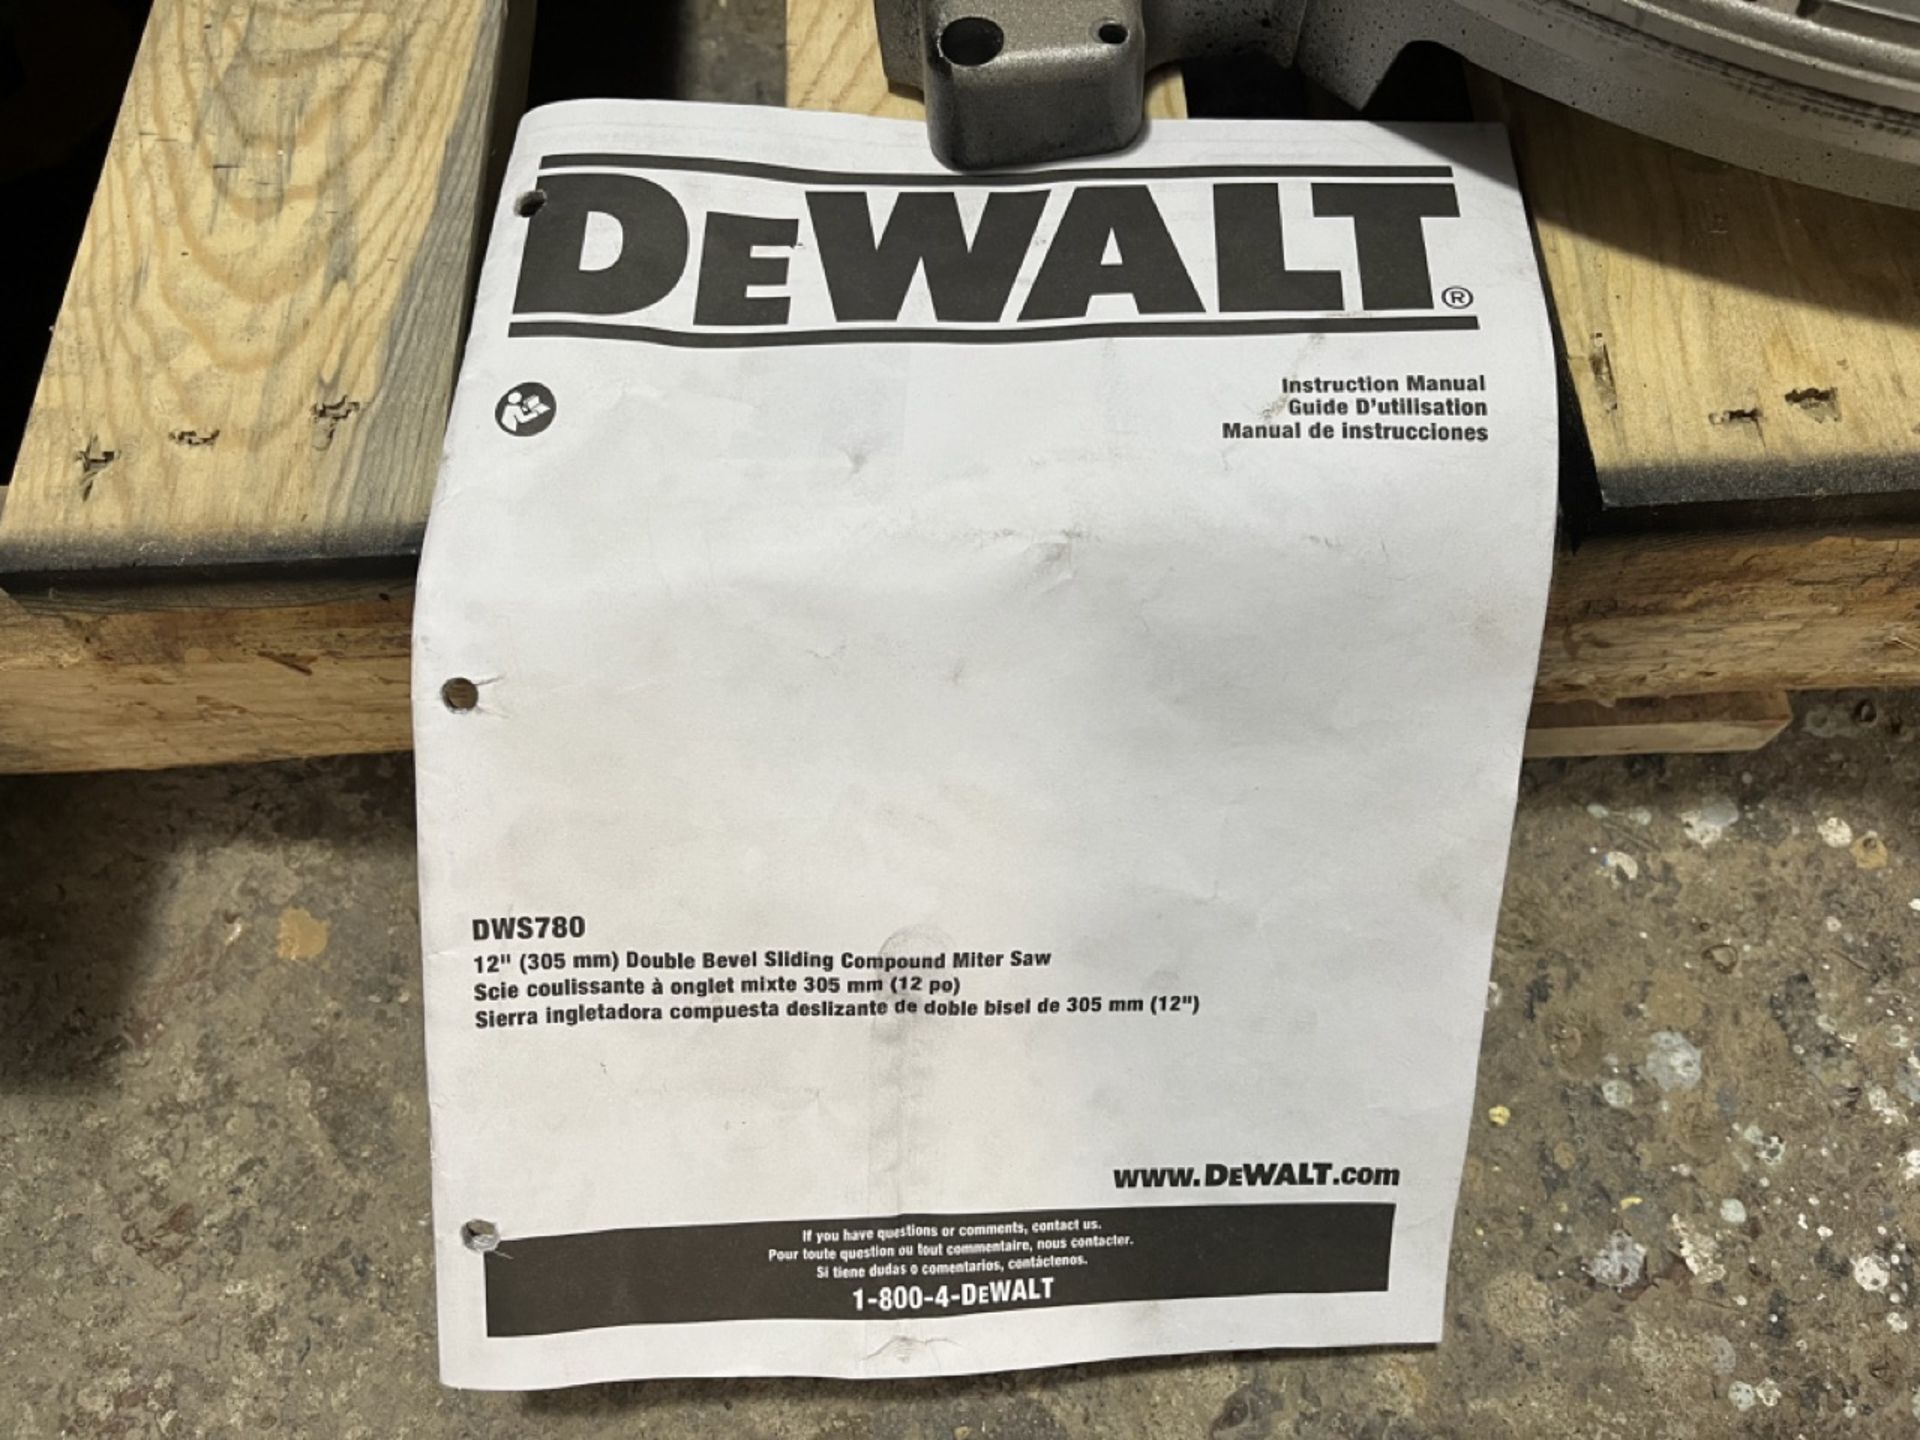 DEWALT 12" Miter Saw, Model DWS780, Serial No. SS, 120V, Includes 5 different sized blades and dust - Image 9 of 10